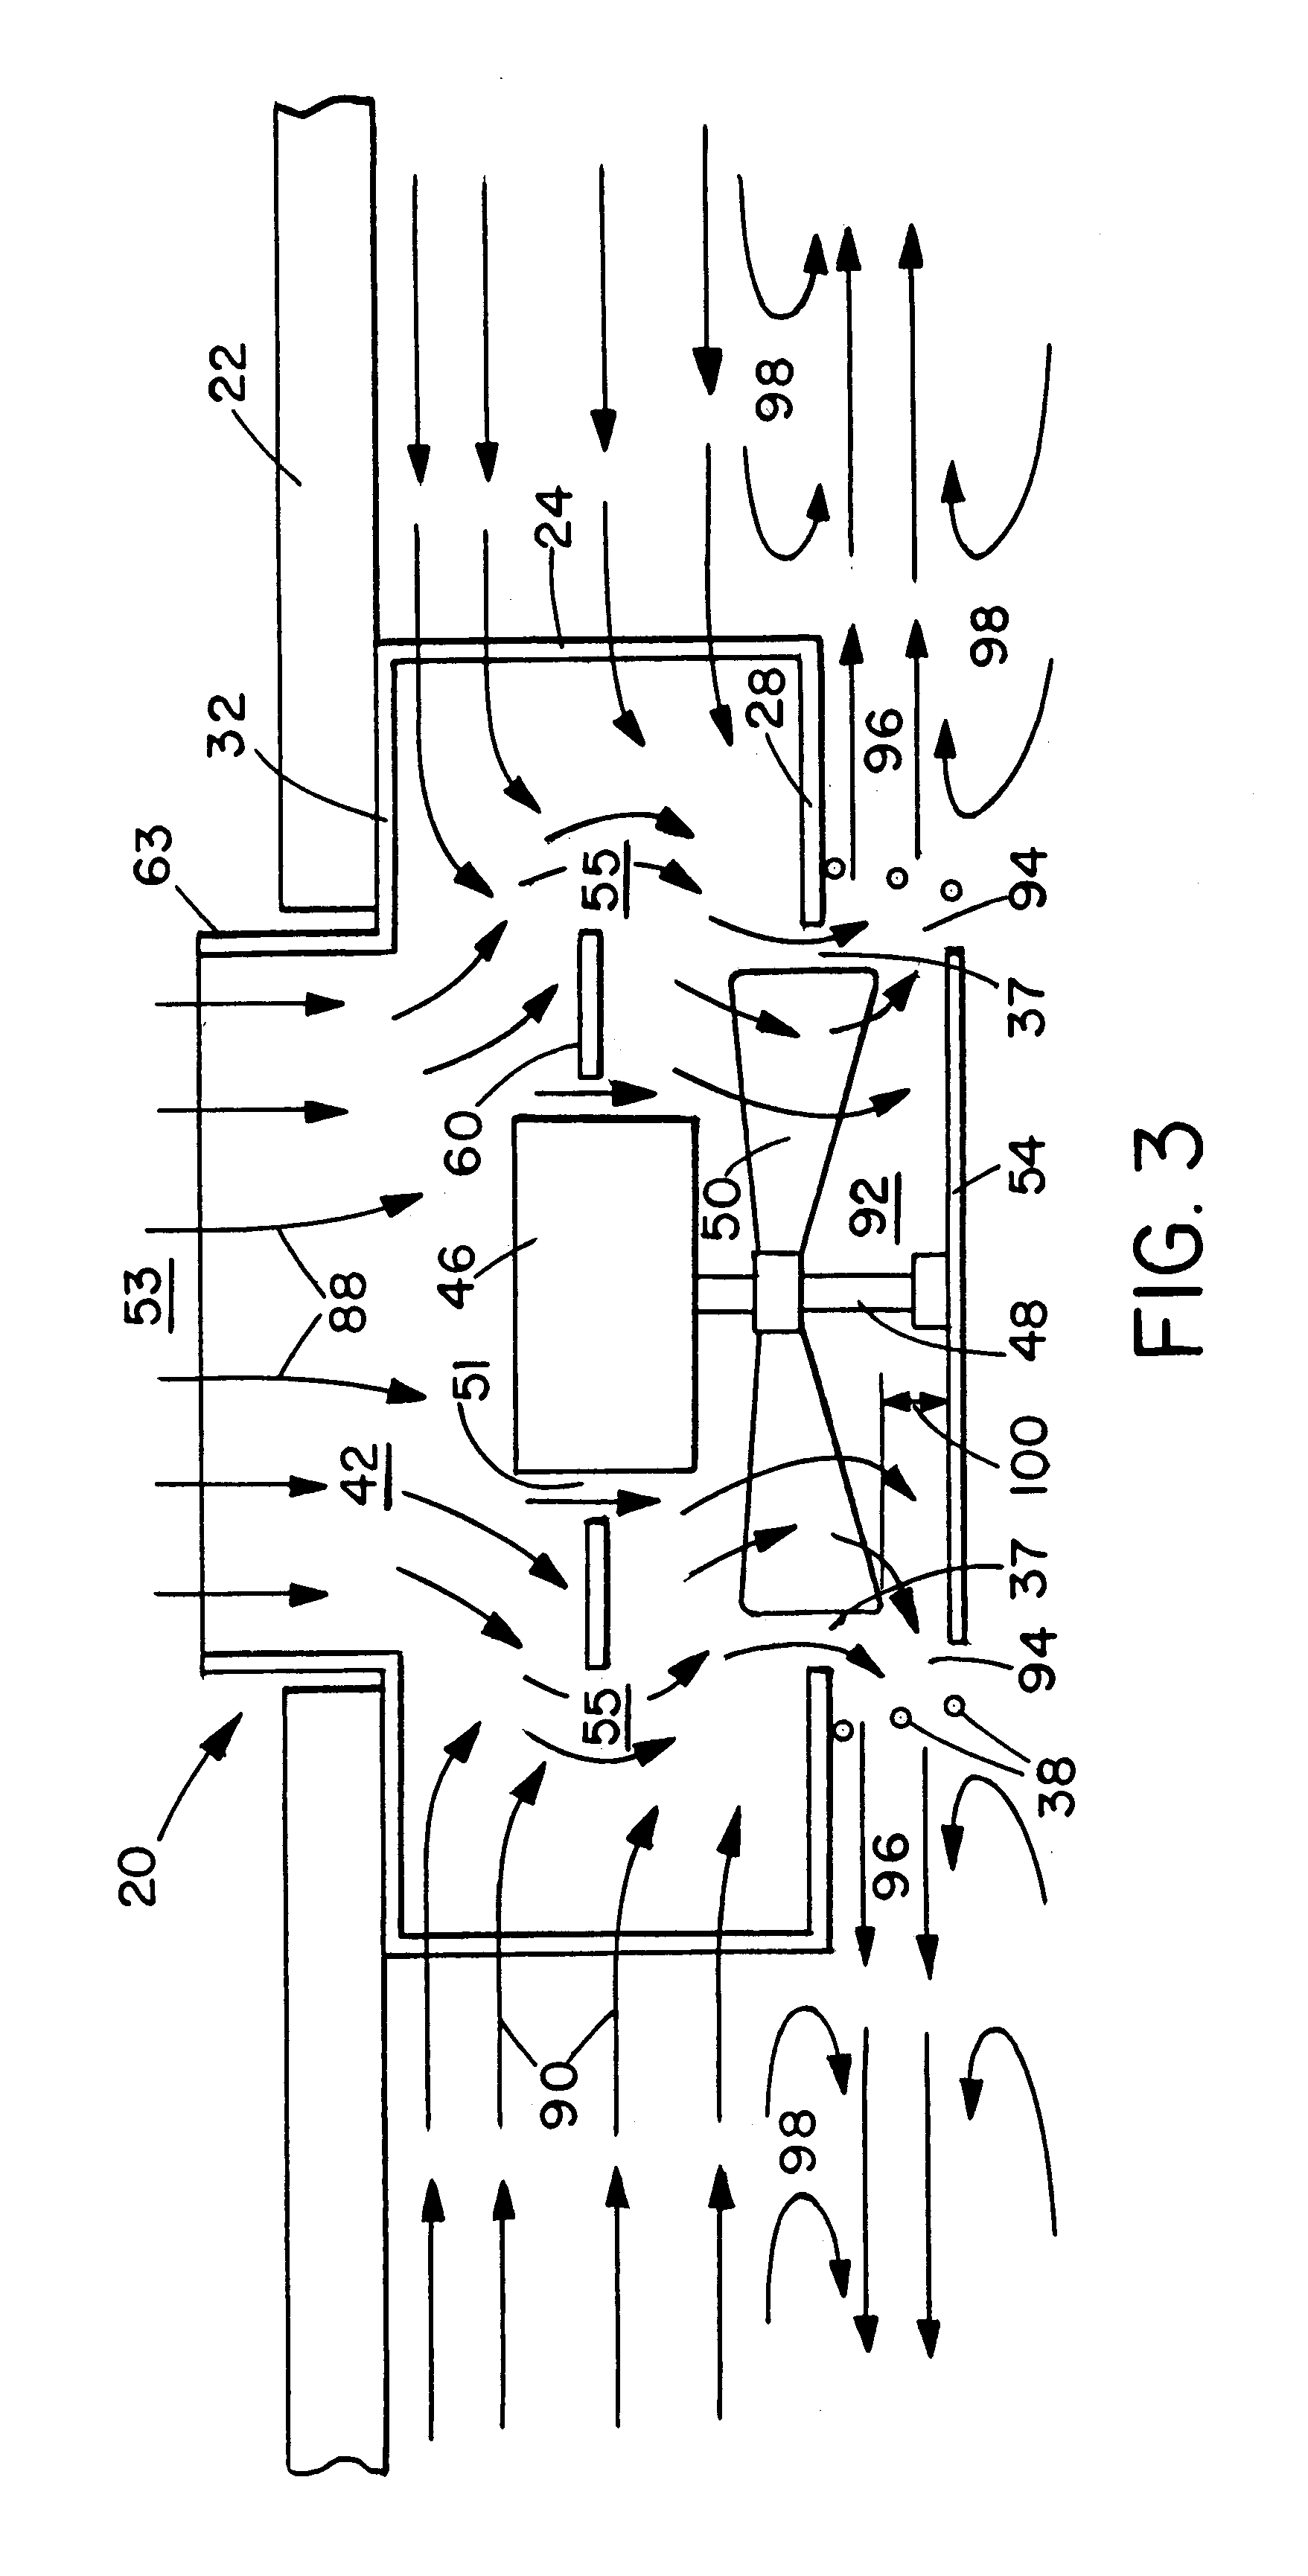 Recirculating air mixer and fan with lateral air flow